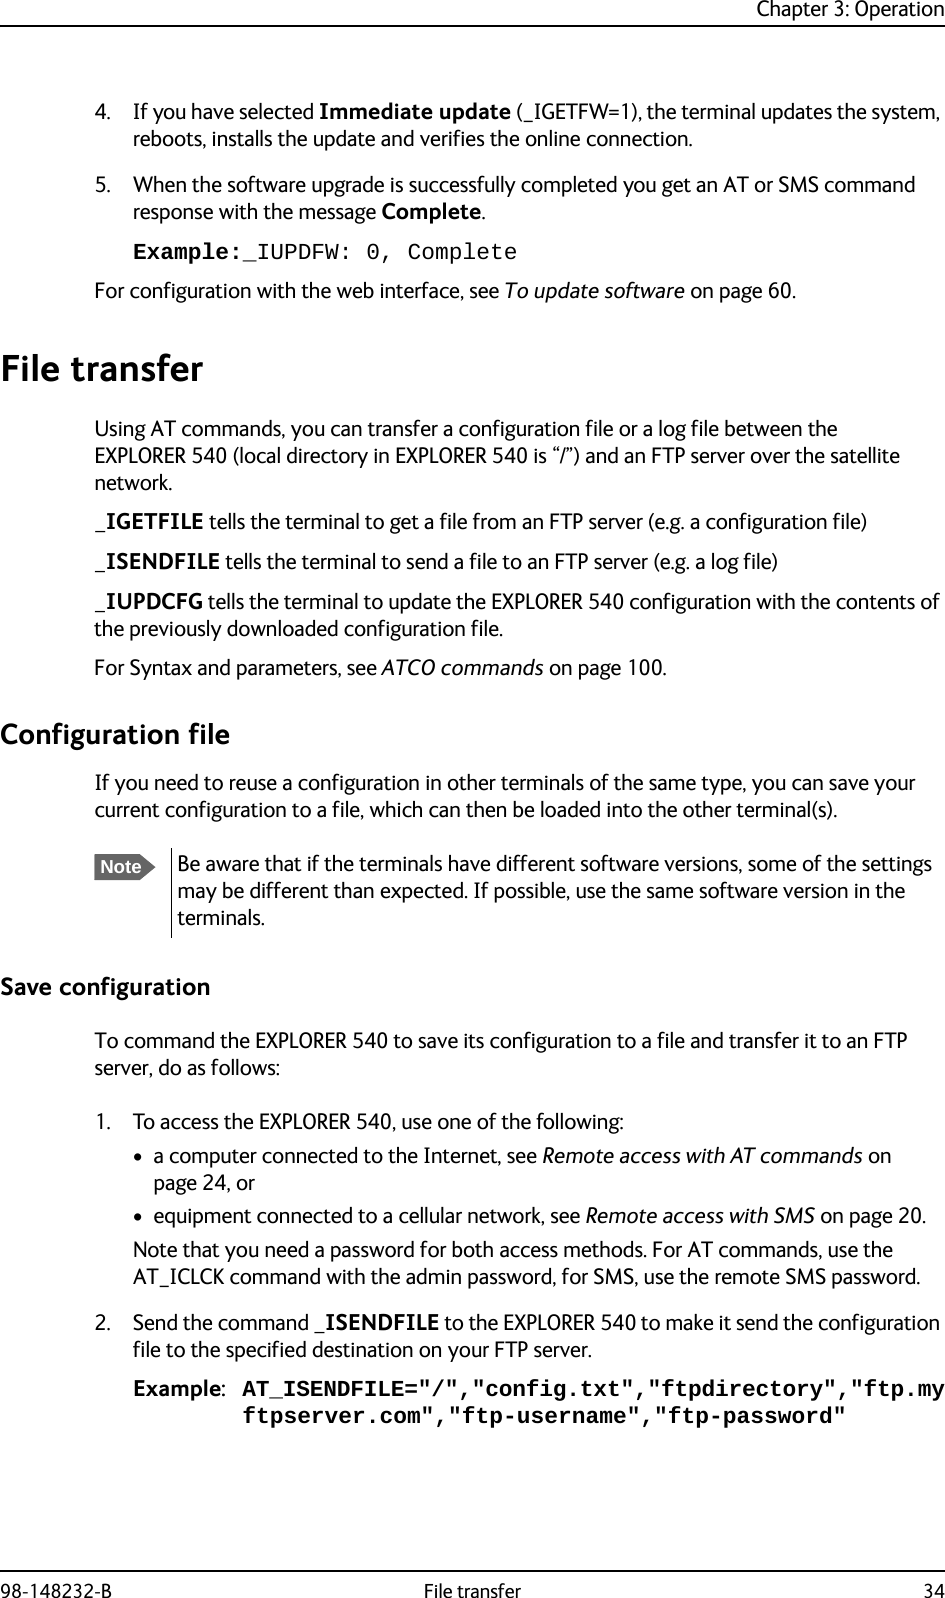 Chapter 3: Operation98-148232-B File transfer 344. If you have selected Immediate update (_IGETFW=1), the terminal updates the system, reboots, installs the update and verifies the online connection.5. When the software upgrade is successfully completed you get an AT or SMS command response with the message Complete.Example:_IUPDFW: 0, CompleteFor configuration with the web interface, see To update software on page 60.File transferUsing AT commands, you can transfer a configuration file or a log file between the EXPLORER 540 (local directory in EXPLORER 540 is “/”) and an FTP server over the satellite network._IGETFILE tells the terminal to get a file from an FTP server (e.g. a configuration file)_ISENDFILE tells the terminal to send a file to an FTP server (e.g. a log file)_IUPDCFG tells the terminal to update the EXPLORER 540 configuration with the contents of the previously downloaded configuration file.For Syntax and parameters, see ATCO commands on page 100.Configuration fileIf you need to reuse a configuration in other terminals of the same type, you can save your current configuration to a file, which can then be loaded into the other terminal(s).Save configurationTo command the EXPLORER 540 to save its configuration to a file and transfer it to an FTP server, do as follows:1. To access the EXPLORER 540, use one of the following:• a computer connected to the Internet, see Remote access with AT commands on page 24, or• equipment connected to a cellular network, see Remote access with SMS on page 20.Note that you need a password for both access methods. For AT commands, use the AT_ICLCK command with the admin password, for SMS, use the remote SMS password.2. Send the command _ISENDFILE to the EXPLORER 540 to make it send the configuration file to the specified destination on your FTP server. Example: AT_ISENDFILE=&quot;/&quot;,&quot;config.txt&quot;,&quot;ftpdirectory&quot;,&quot;ftp.myftpserver.com&quot;,&quot;ftp-username&quot;,&quot;ftp-password&quot;NoteBe aware that if the terminals have different software versions, some of the settings may be different than expected. If possible, use the same software version in the terminals.